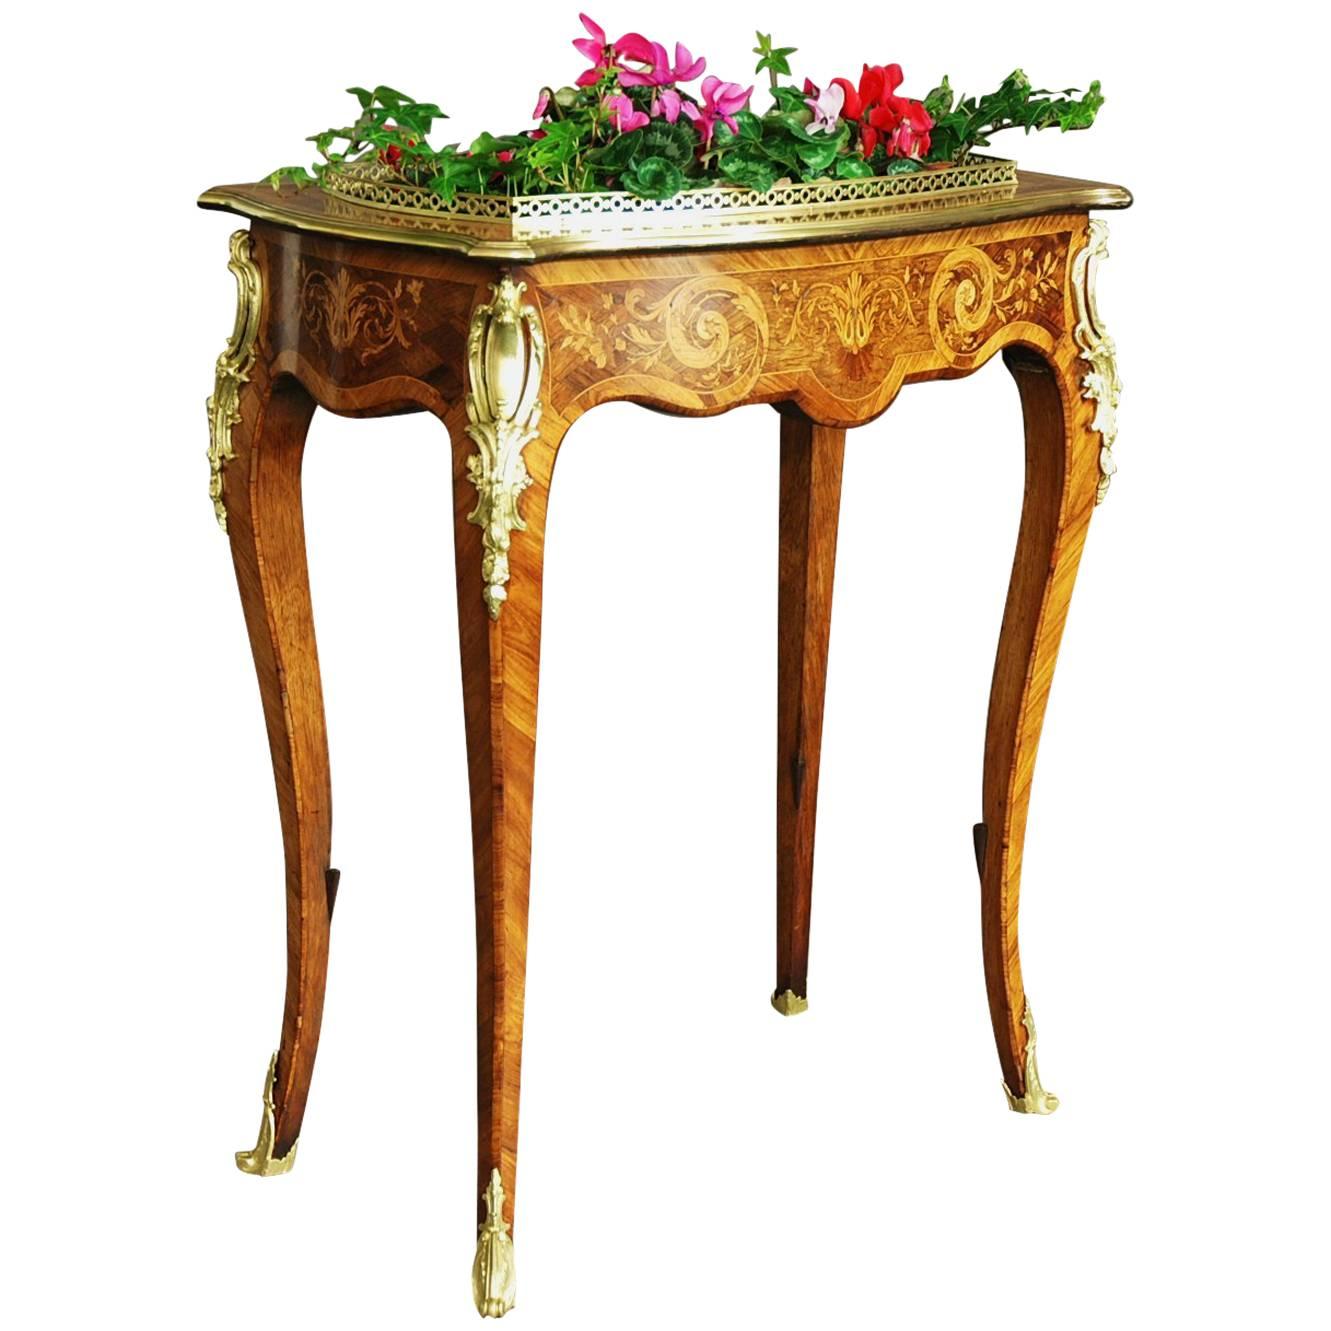 Edwards & Roberts Inlaid Plant Stand or Jardiniere